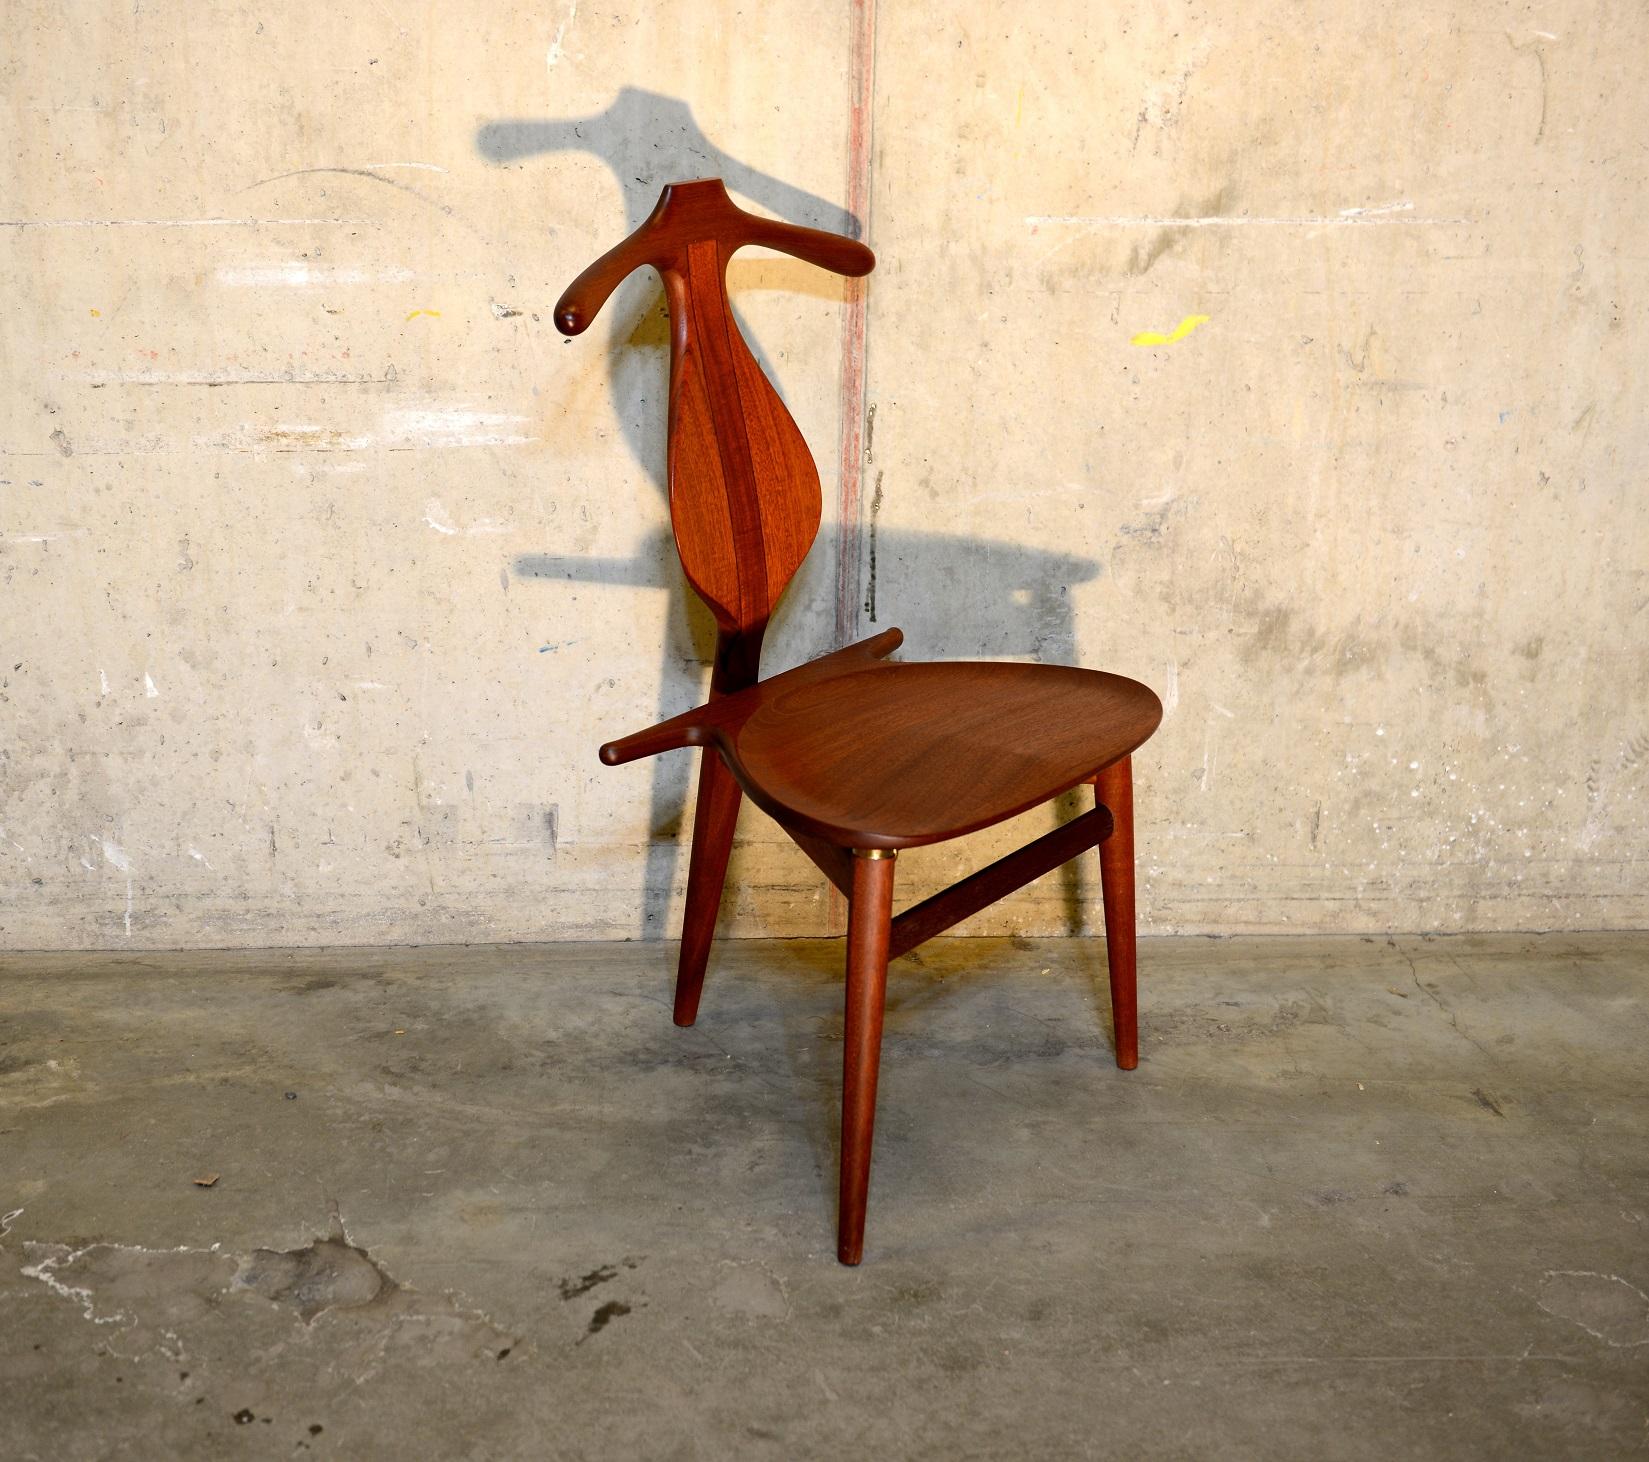 Valet chair model PP250 made of Cuba mahogany and with Wenge inlays (no longer in production with this type of wood). Designed by Danish designer Hans J. Wegner in the 1950s. Produced by furniture maker PP Møbler in Denmark. Midcentury Scandinavian